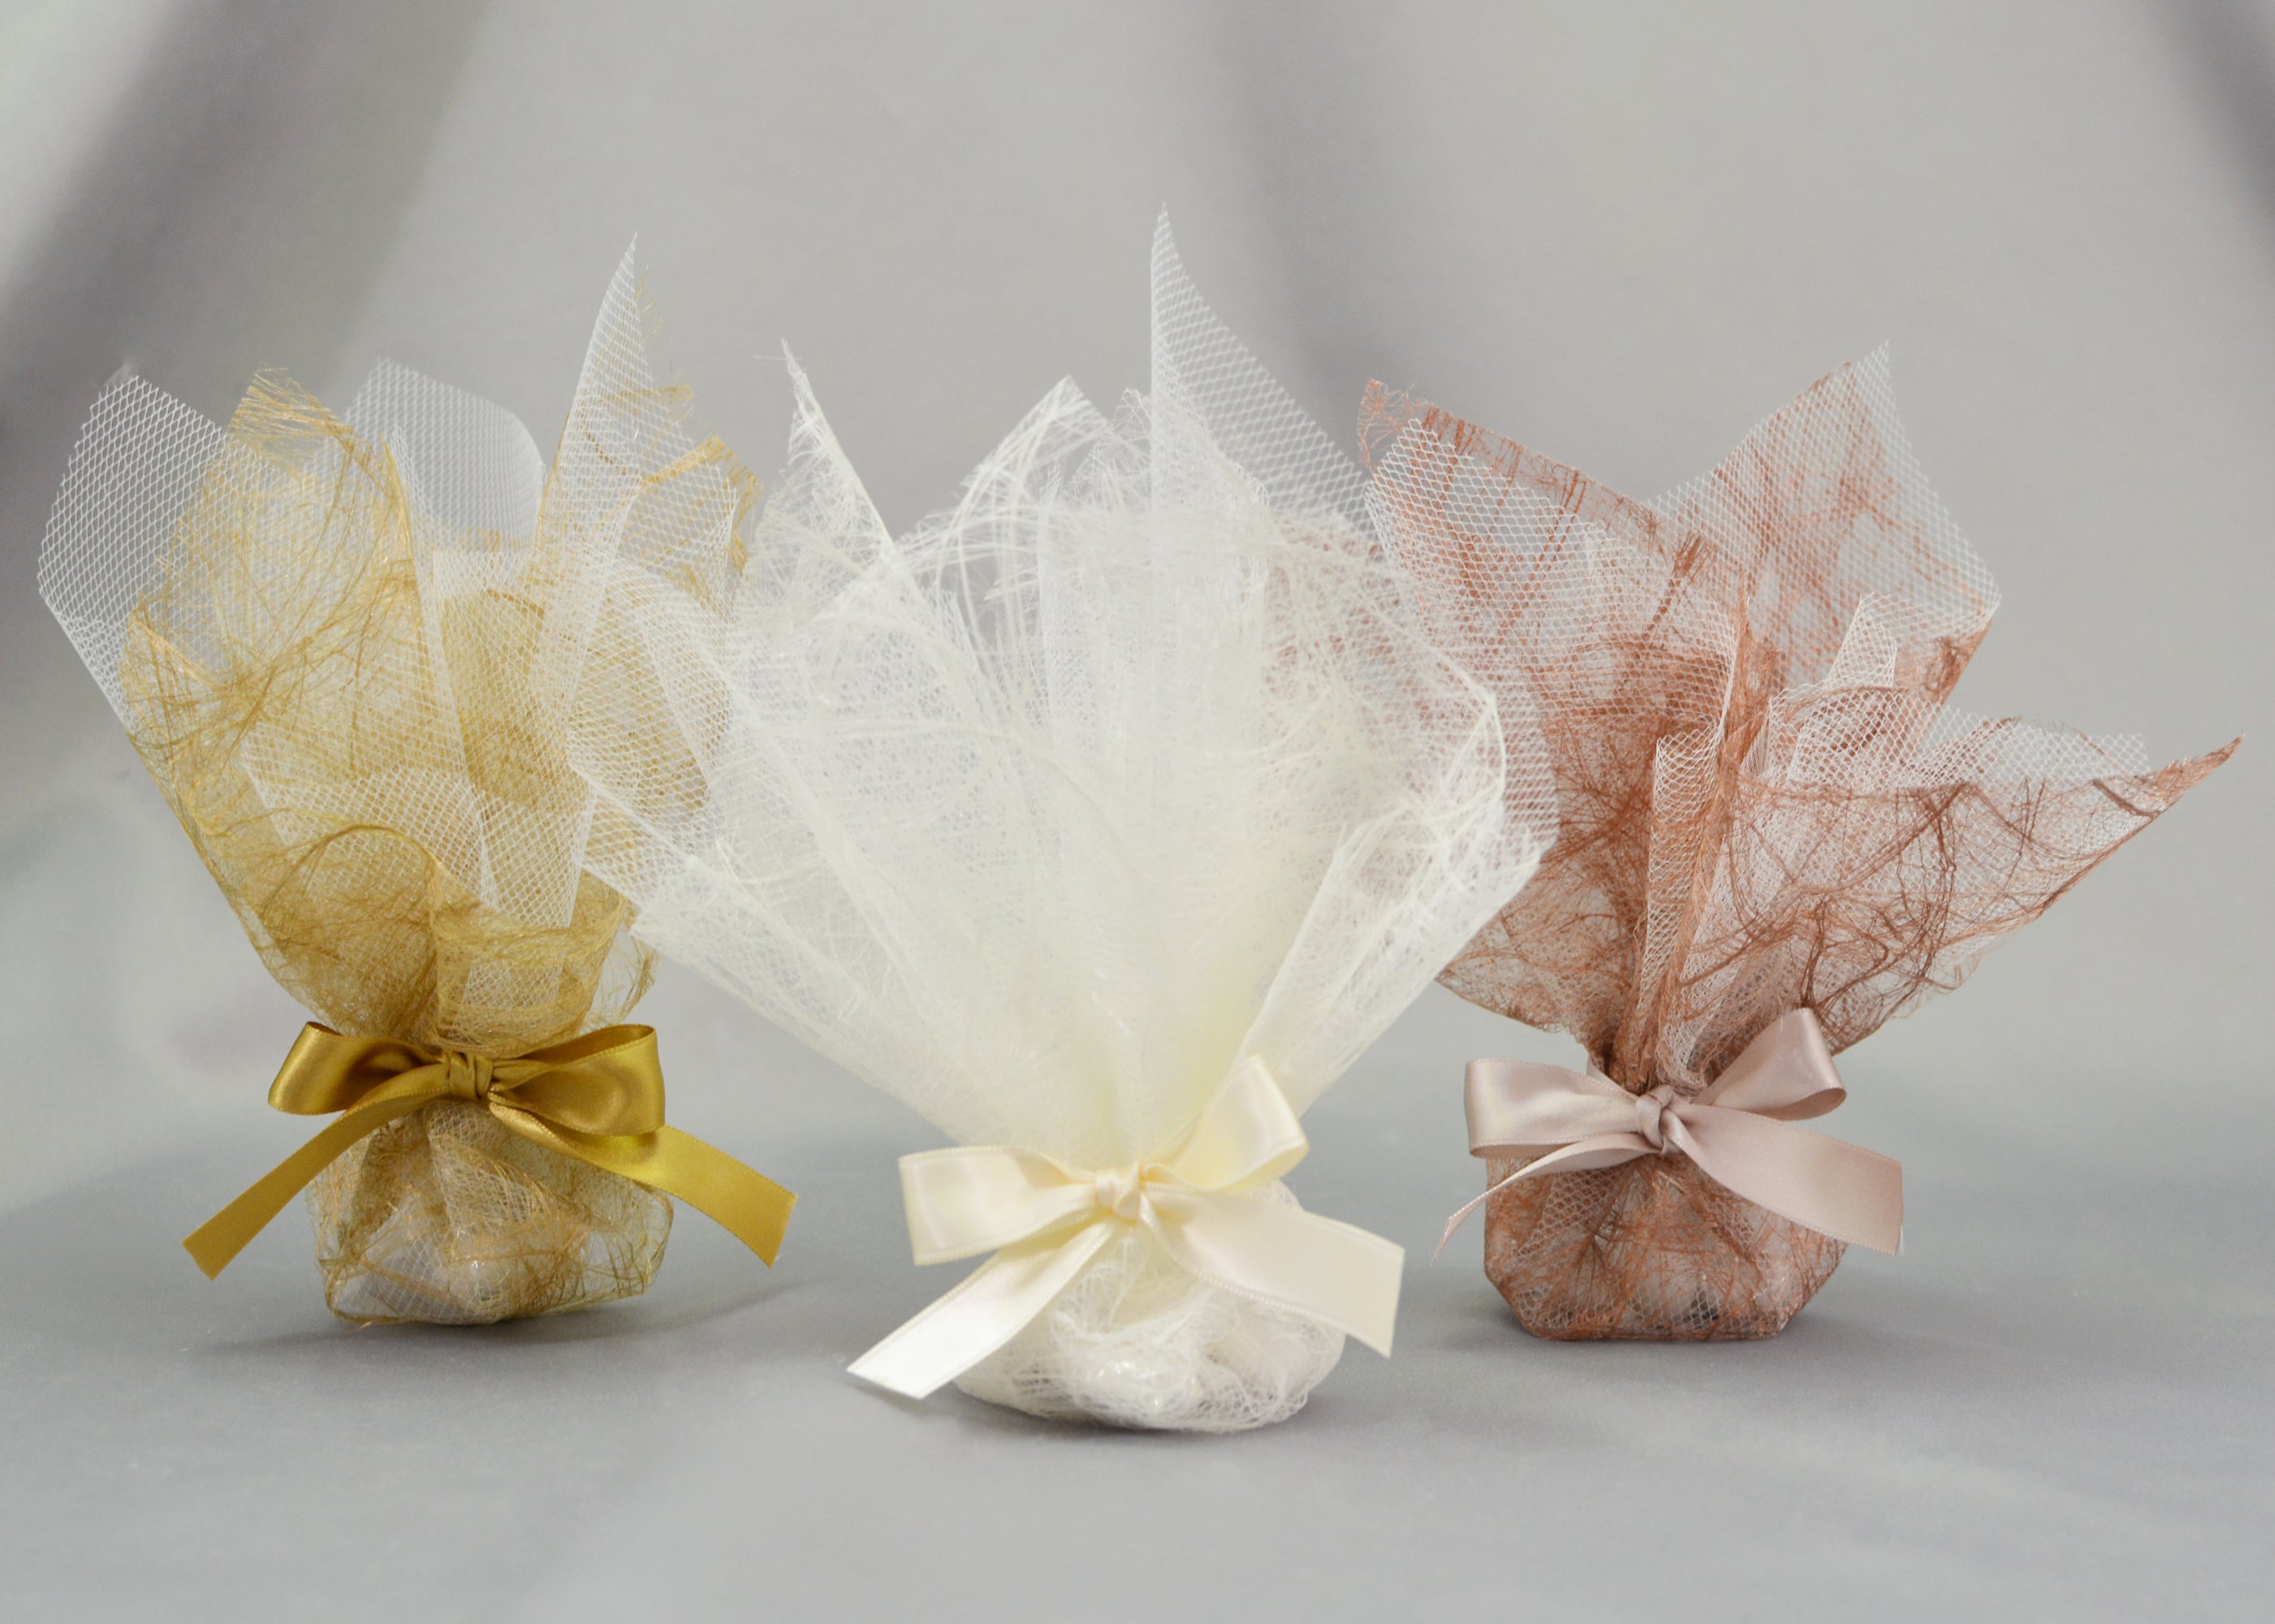 Scented Padded Hangers - Make Perfect Wedding or Shower Gifts